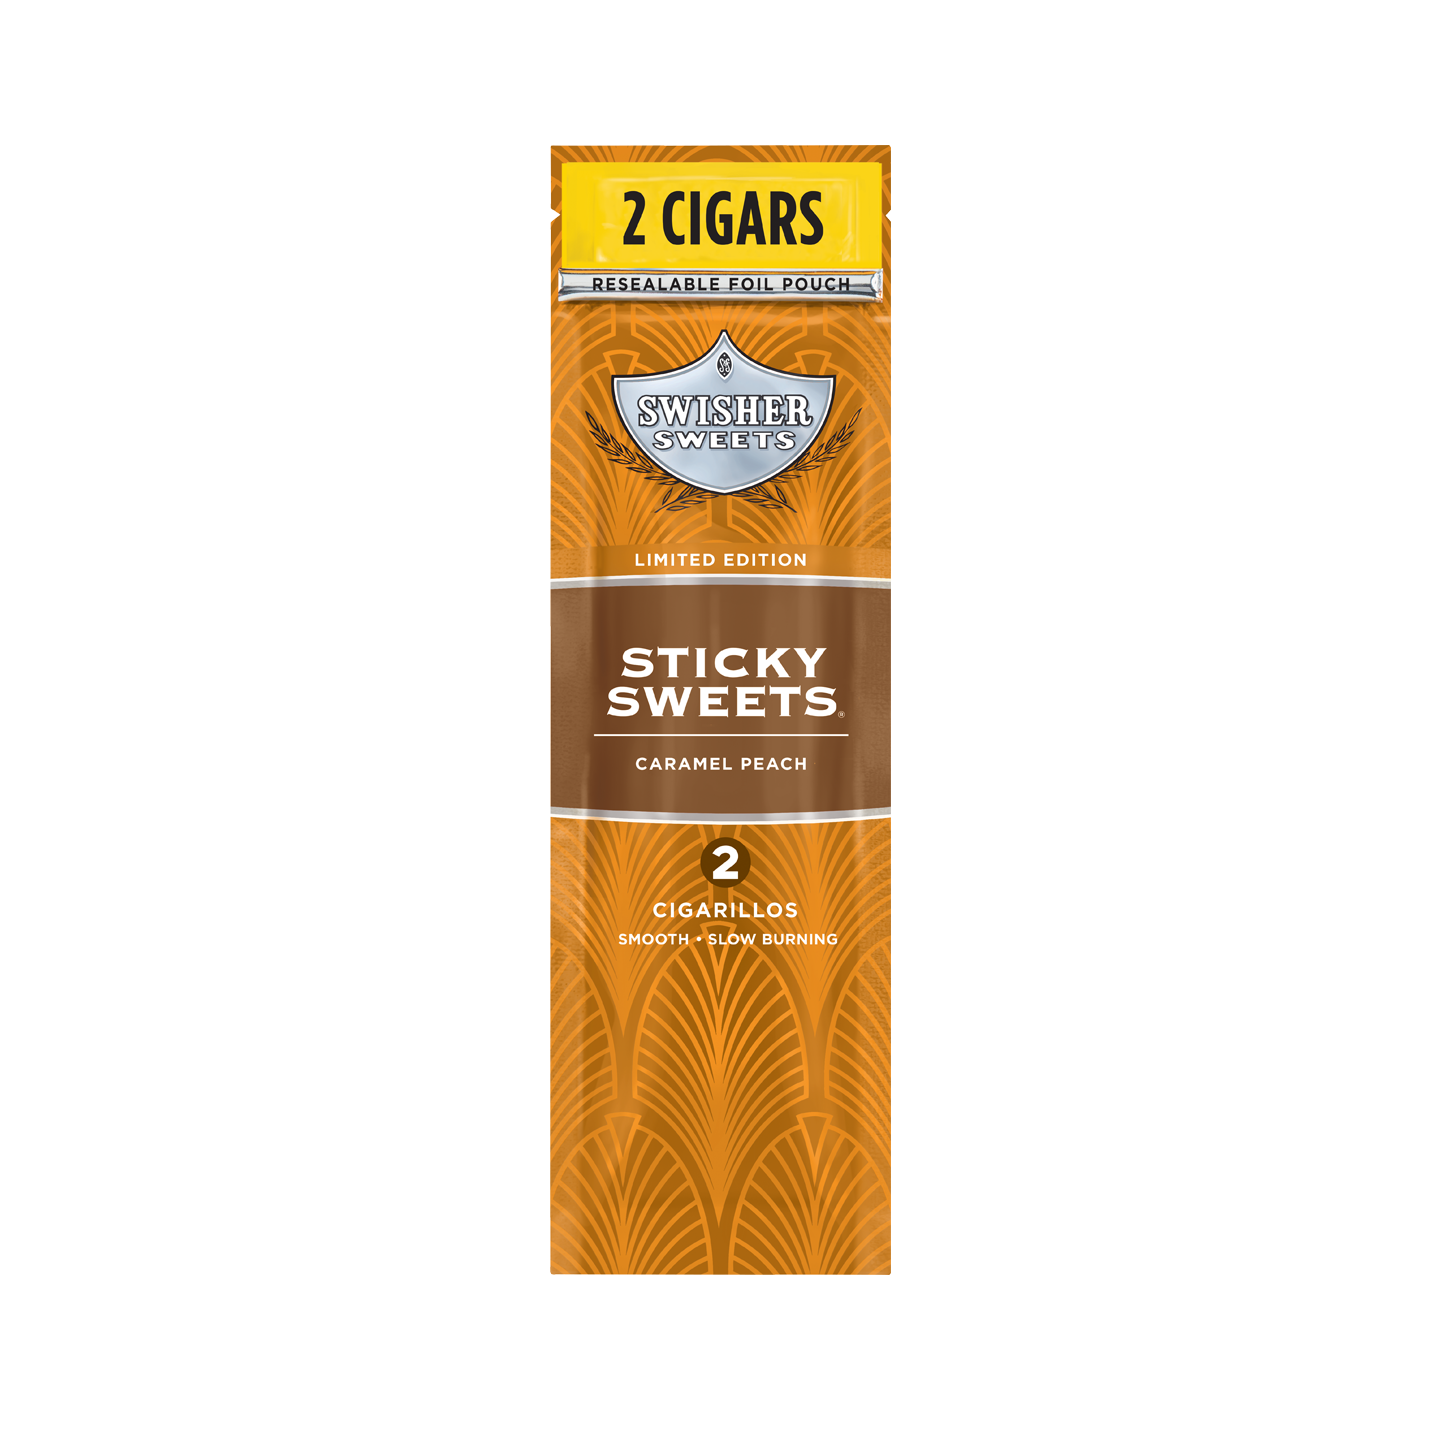 SWISHER SWEETS LTO - Sticky Sweets